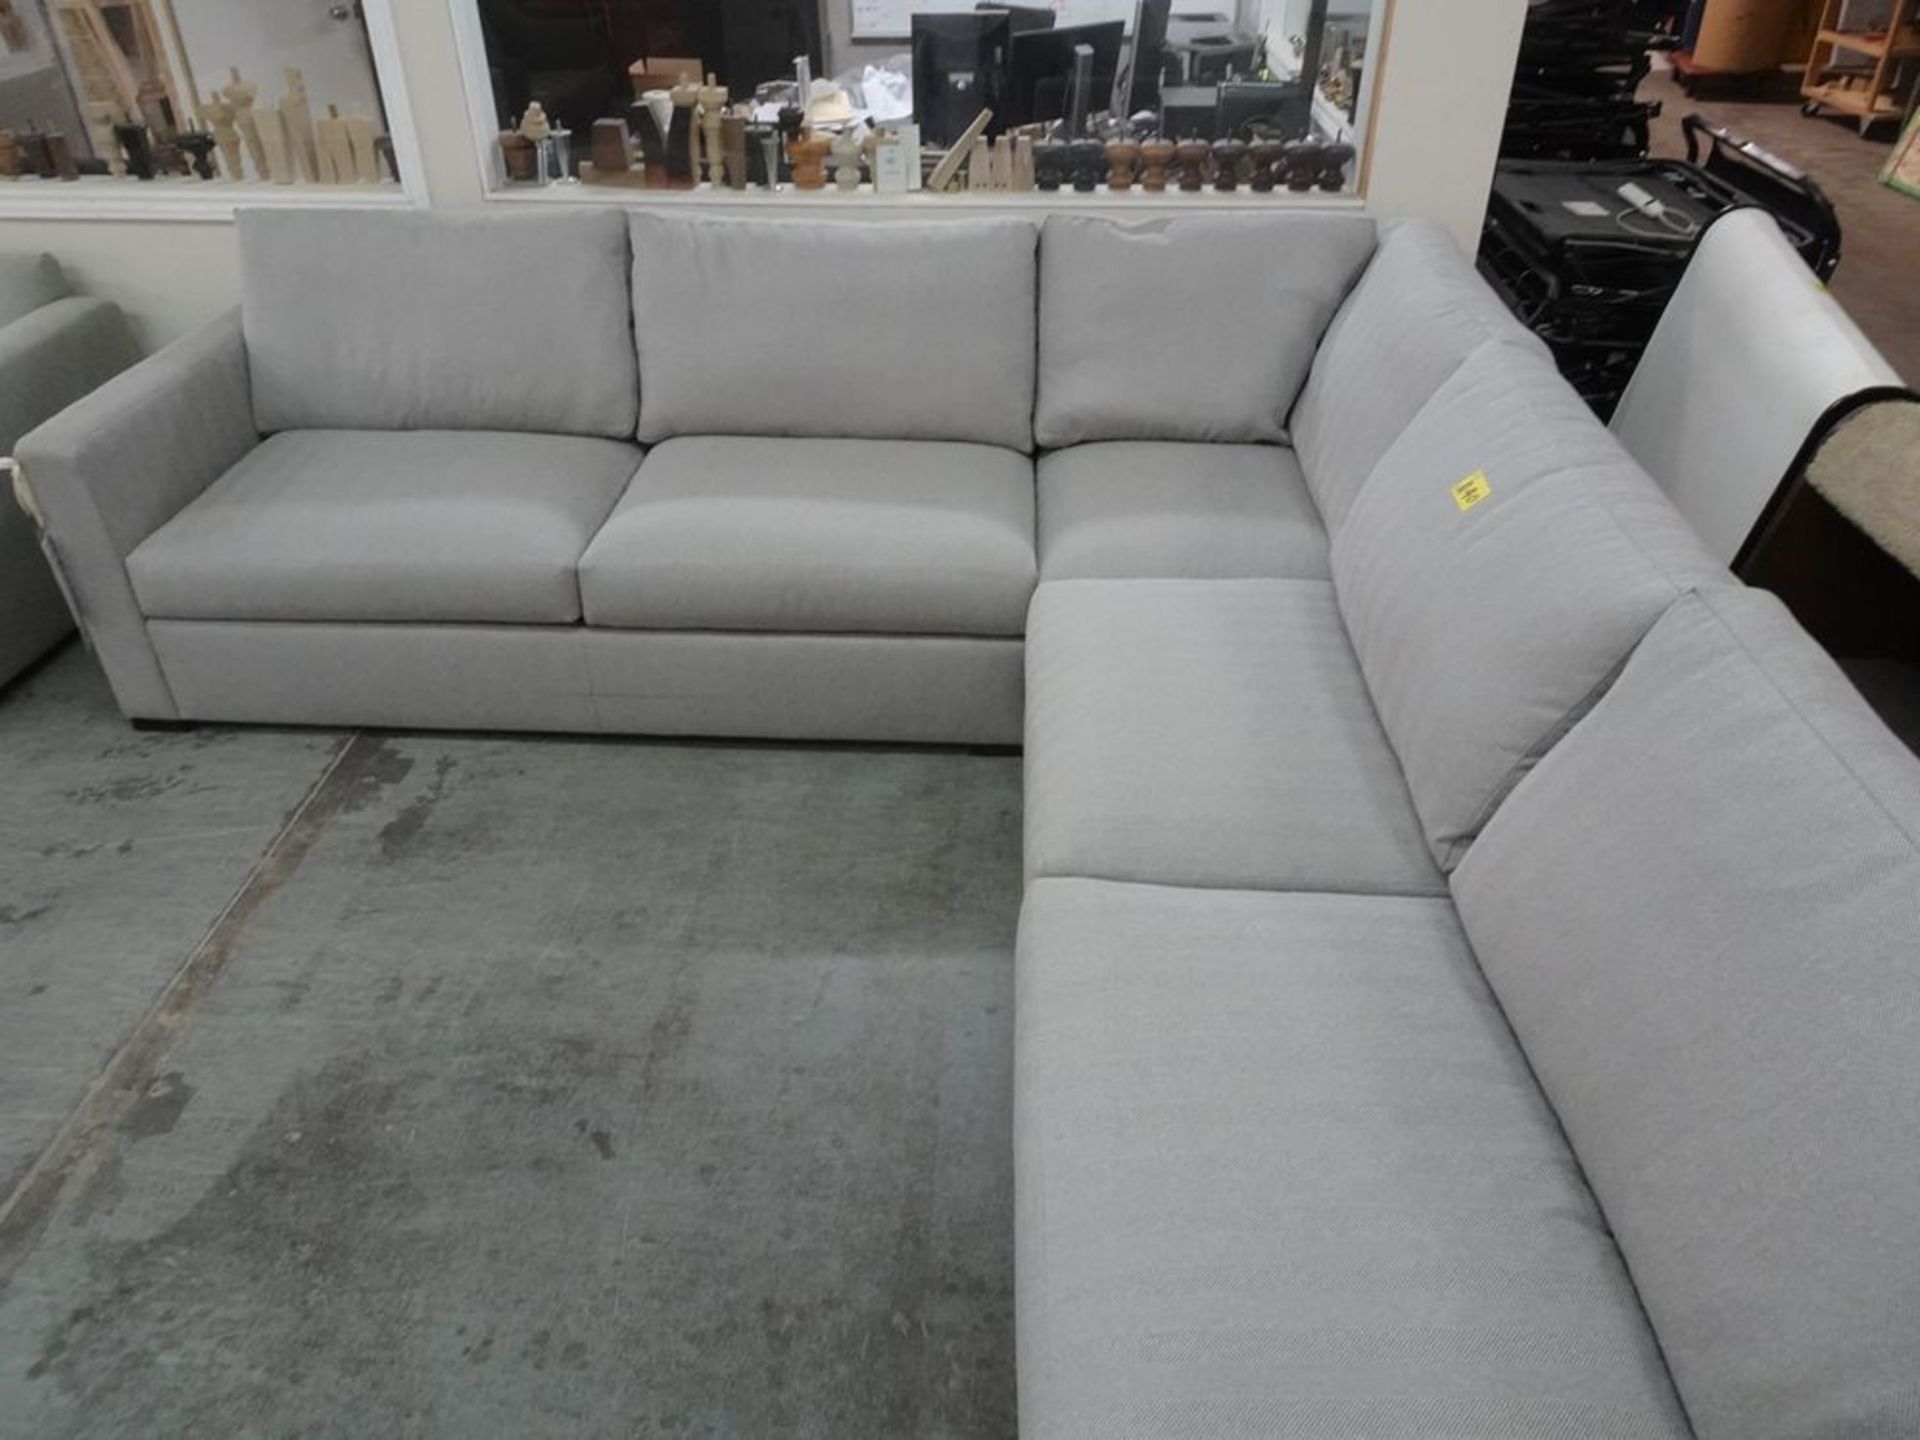 3 PIECE SECTIONAL SOFA - PALE GRAY - Image 4 of 4